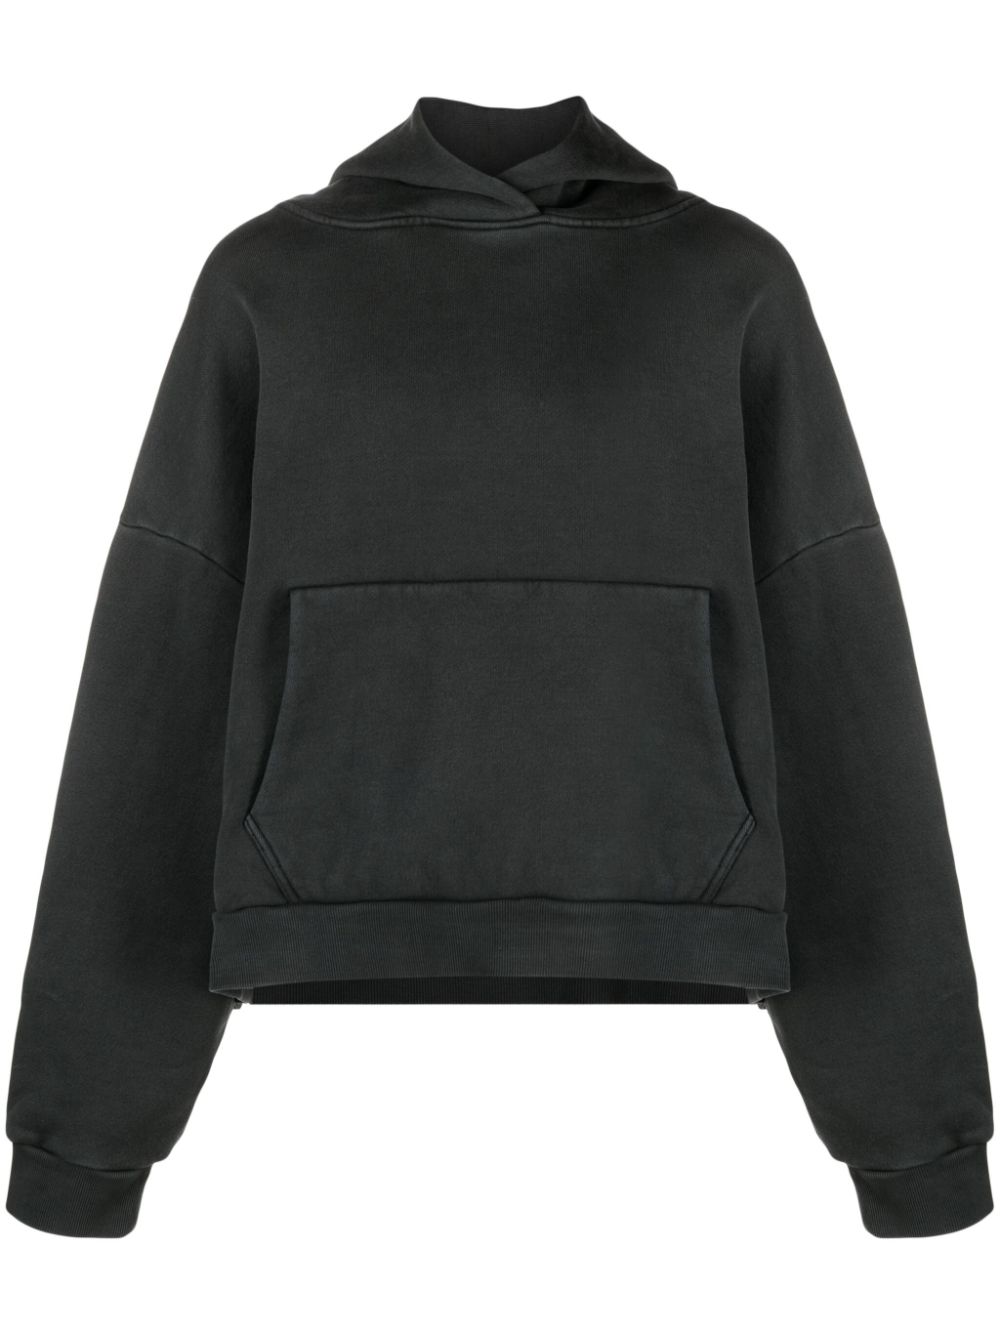 ENTIRE STUDIOS EXTRA-LONG SLEEVED ORGANIC COTTON HOODIE